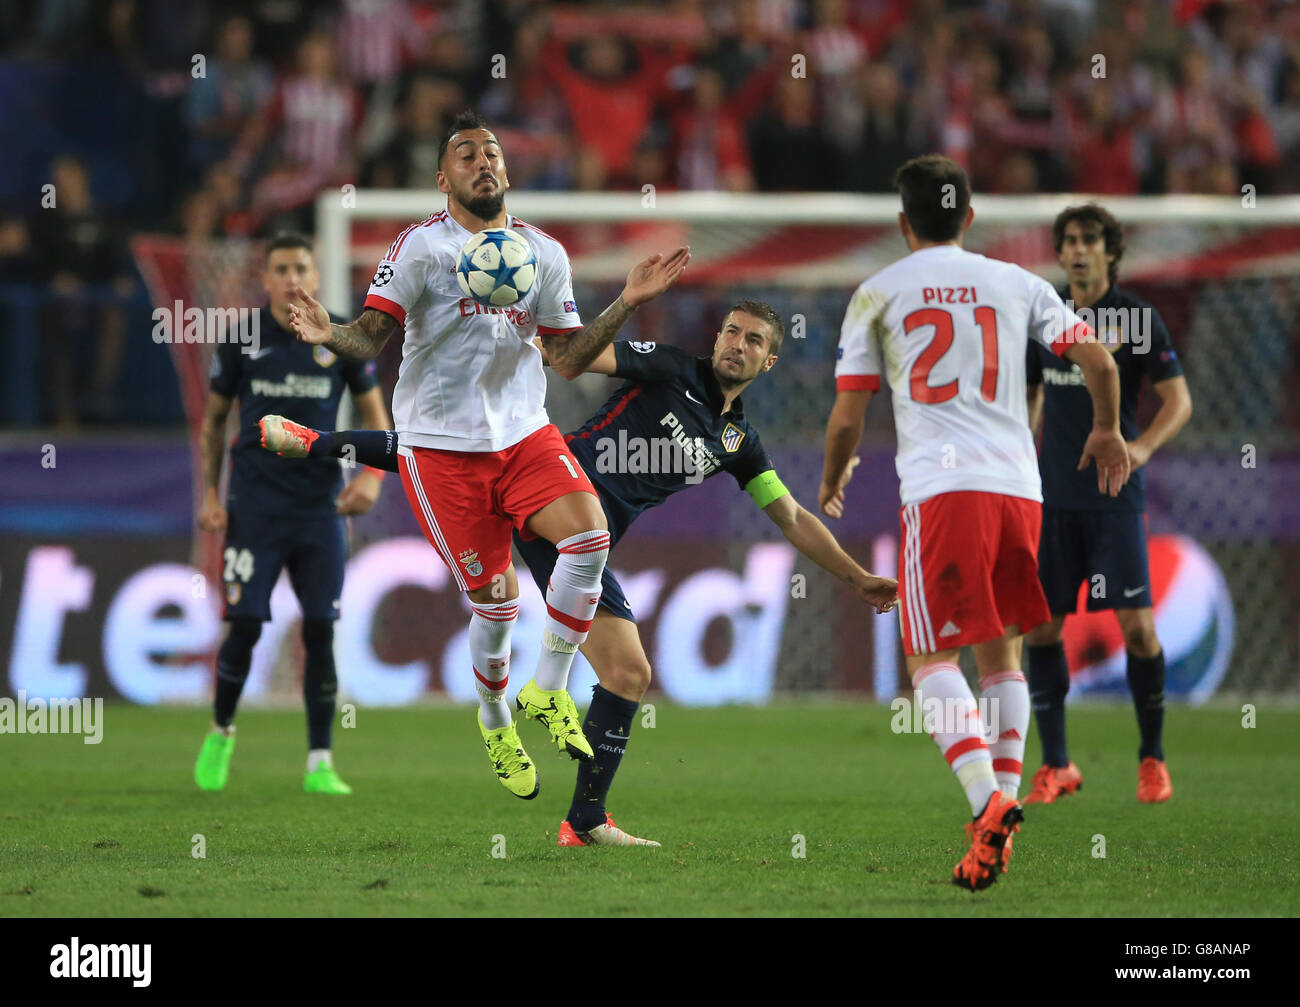 Soccer - UEFA Champions League - Group C - Atletico Madrid v SL Benfica's - Vicente Calderon. Benfica's Kostas Mitroglou controls ball on his chest as his challenged by Atletico Madrid's Gabi Stock Photo